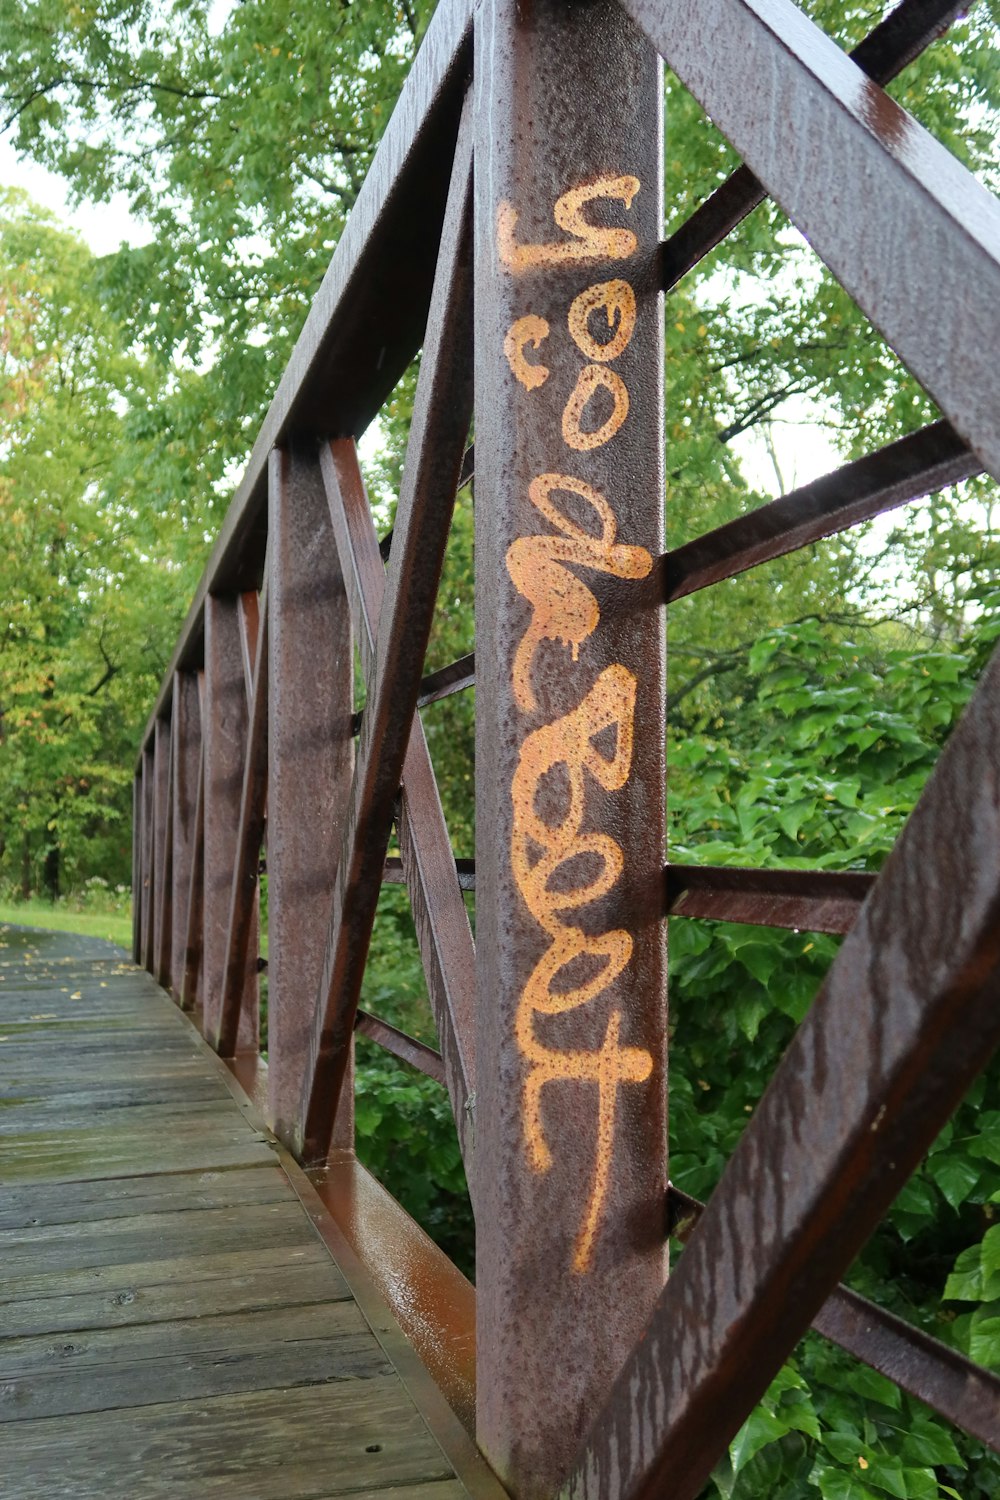 a wooden bridge with a wooden railing